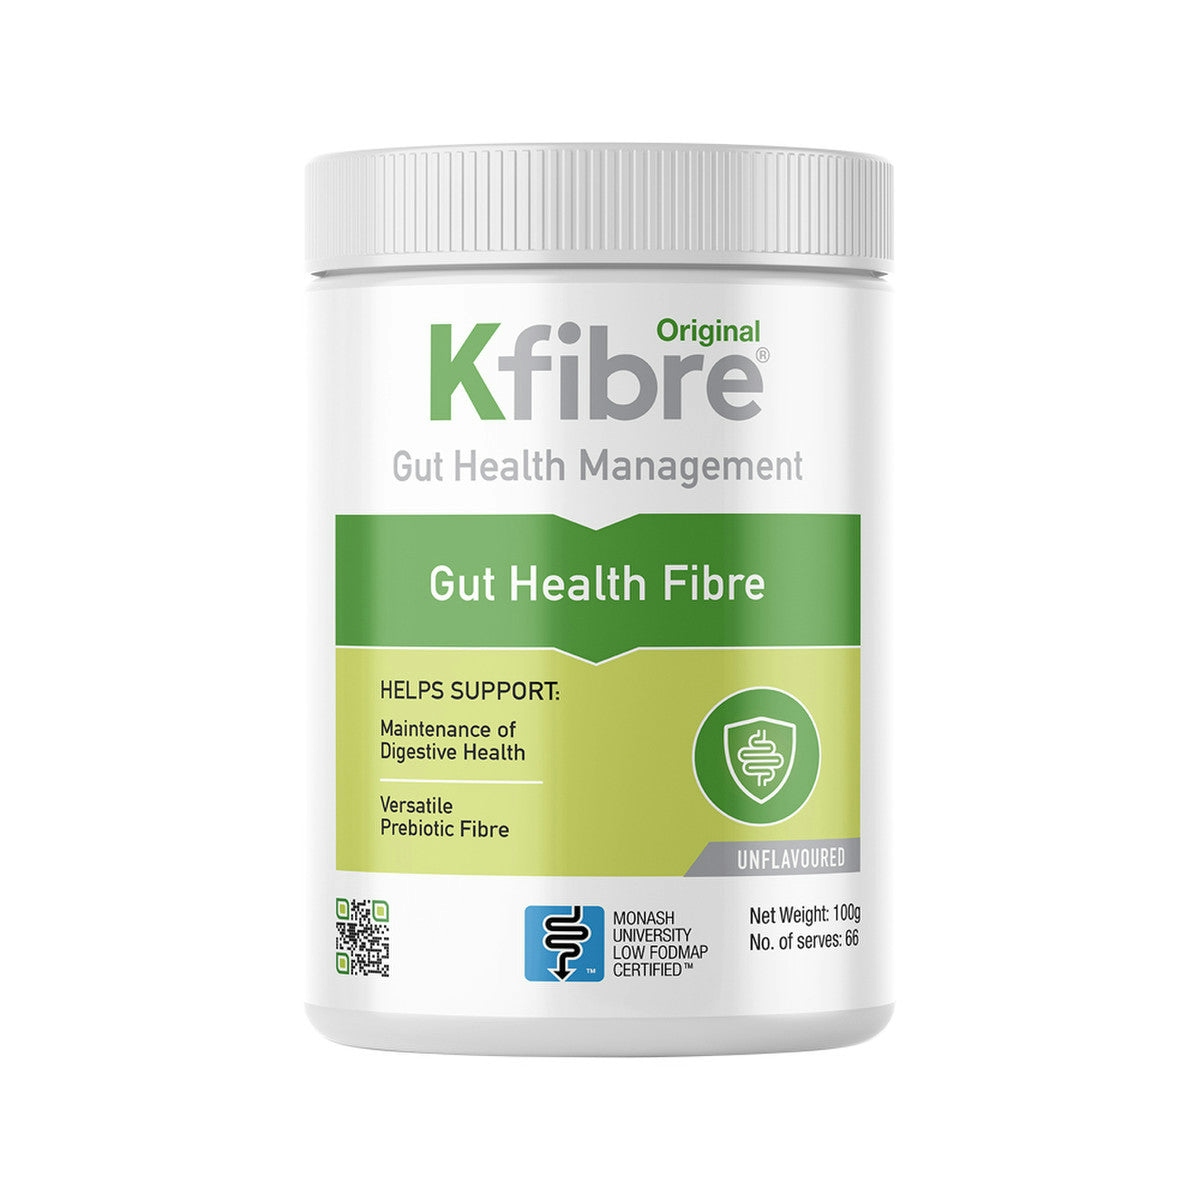 image of Kfibre Original Gut Health Fibre Unflavoured Tub 100g with white background 